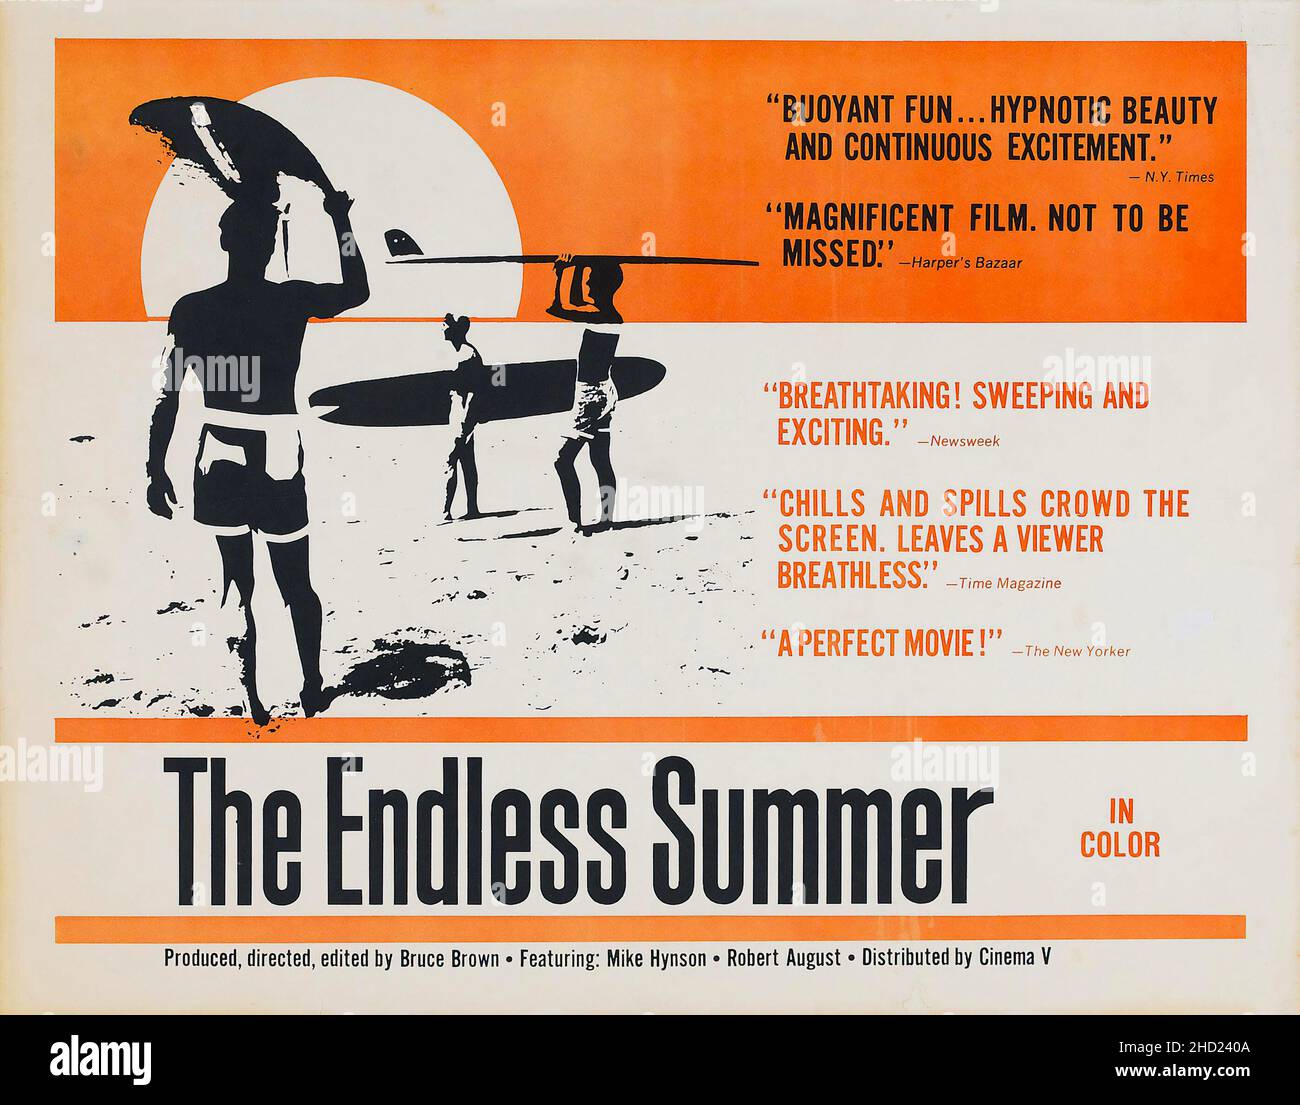 https://c8.alamy.com/comp/2HD240A/half-sheet-poster-promoting-the-theatrical-release-of-the-1966-surf-movie-the-endless-summer-a-bruce-brown-film-cinema-v-2HD240A.jpg